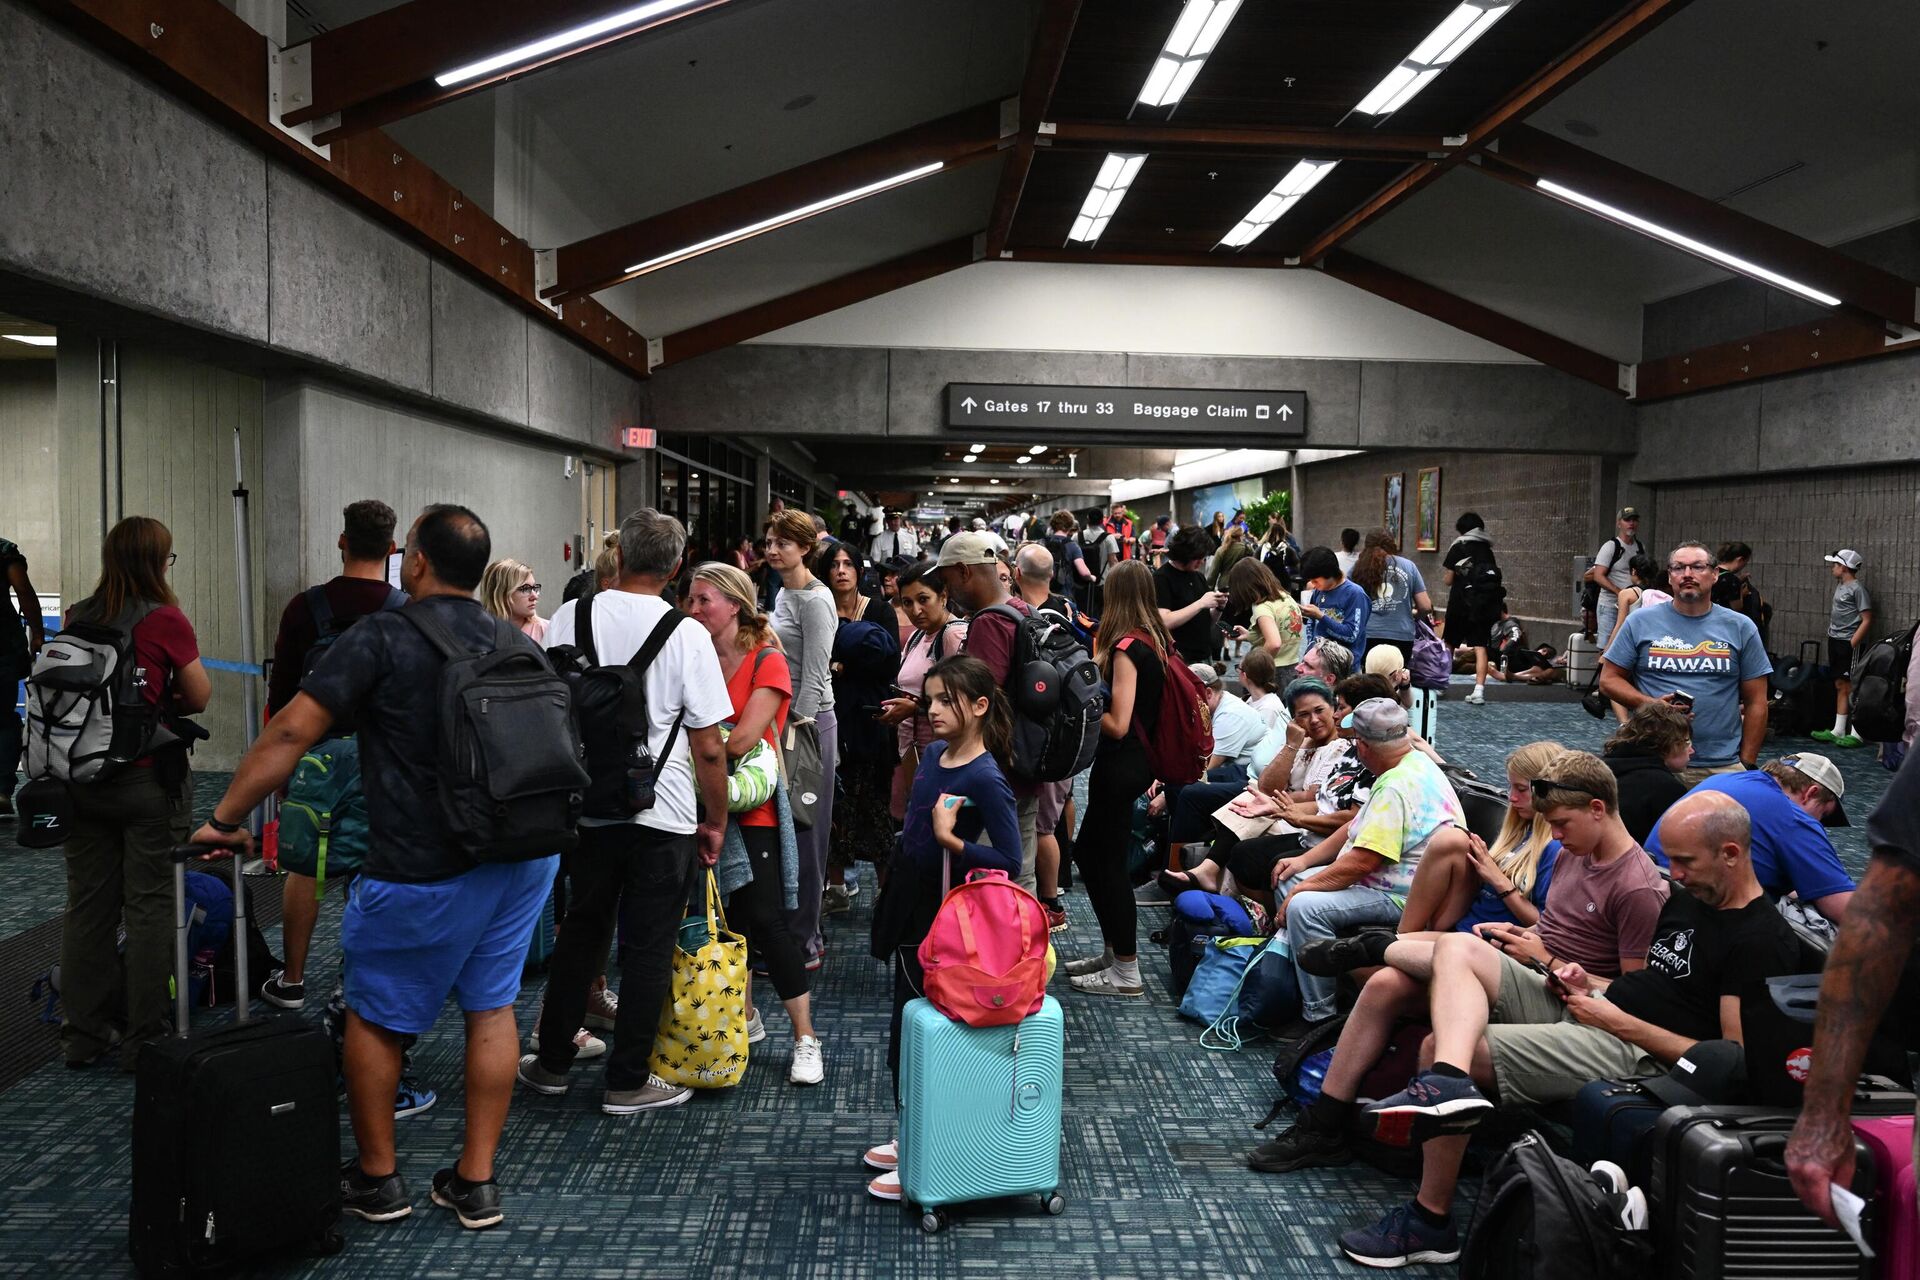 Passengers try to rest and sleep after canceled and delayed flights while others wait to board flights off the island as thousands of passengers were stranded at the Kahului Airport (OGG) in the aftermath of wildfires in western Maui in Kahului, Hawaii on August 9, 2023. The death toll from a wildfire that turned a historic Hawaiian town to ashes has risen to 36 people, officials said on August 9. - Sputnik International, 1920, 10.08.2023